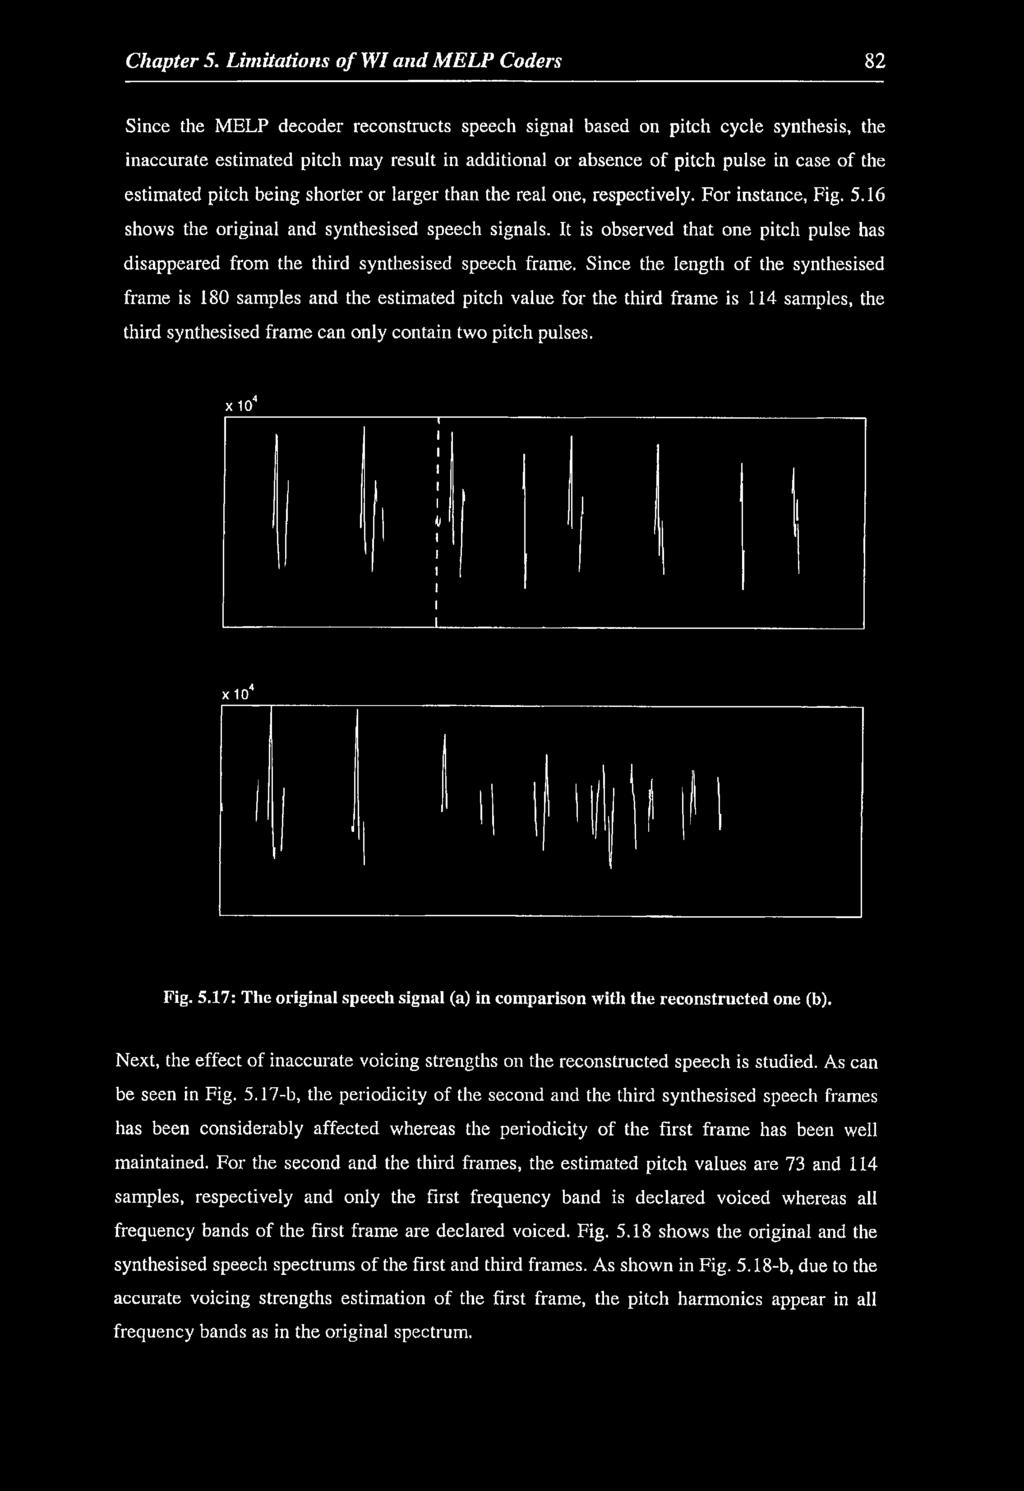 pitch pulse in case of the estimated pitch being shorter or larger than the real one, respectively. For instance, Fig. 5.16 shows the original and synthesised speech signals.